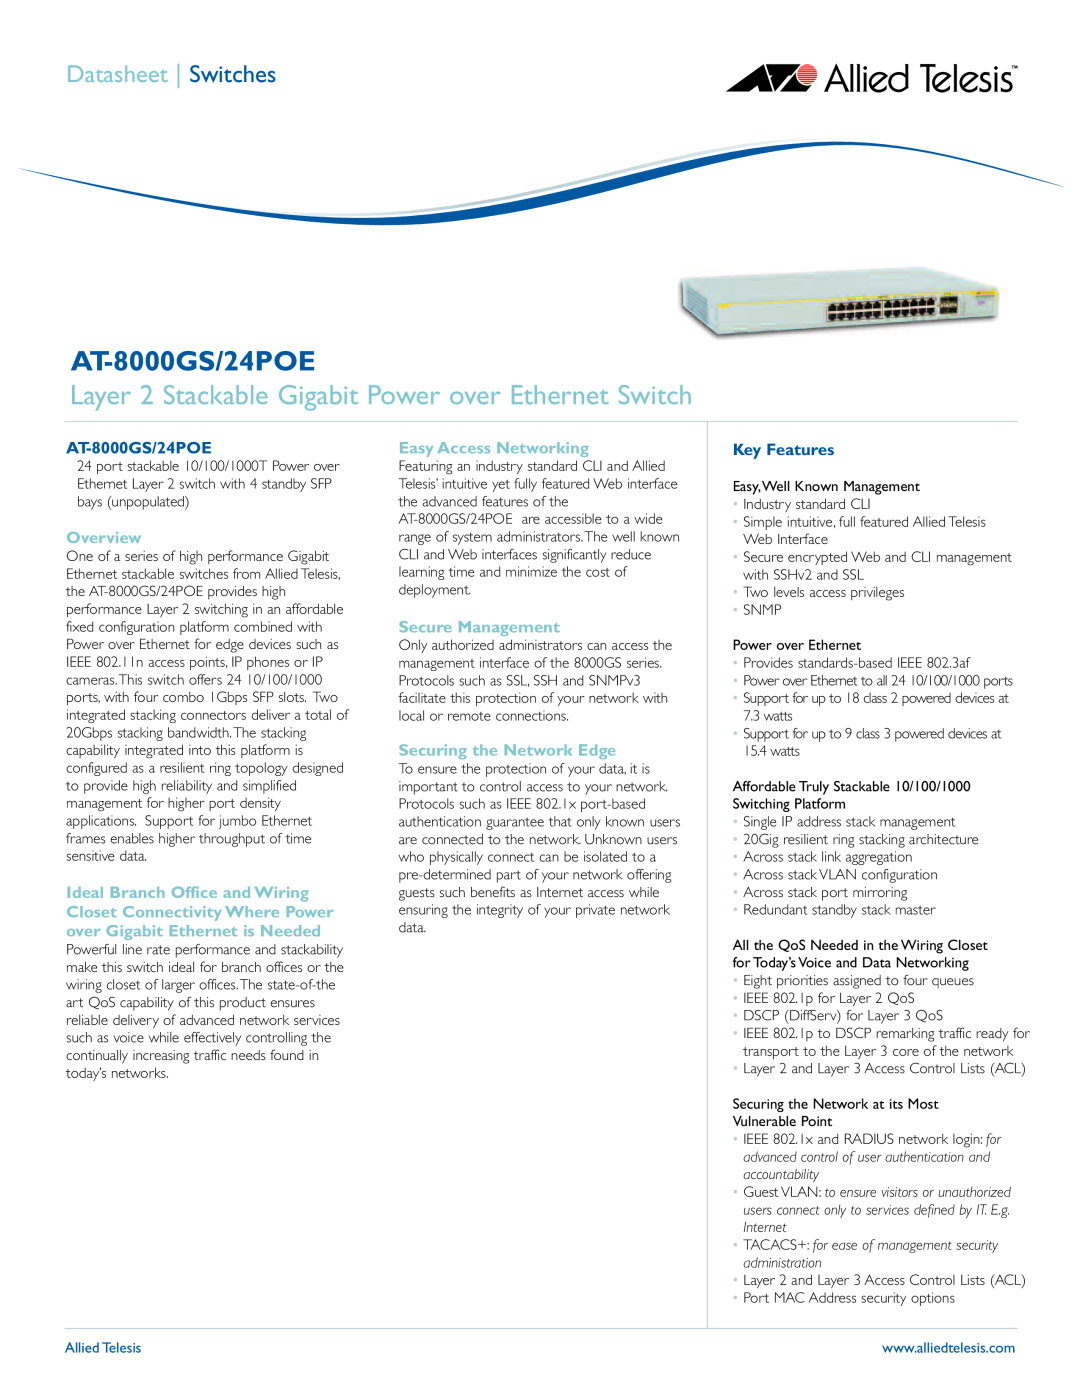 Allied Telesis AT-8000GS/24POE manual Layer 2 Stackable Gigabit Power over Ethernet Switch, Key Features, Allied Telesis 